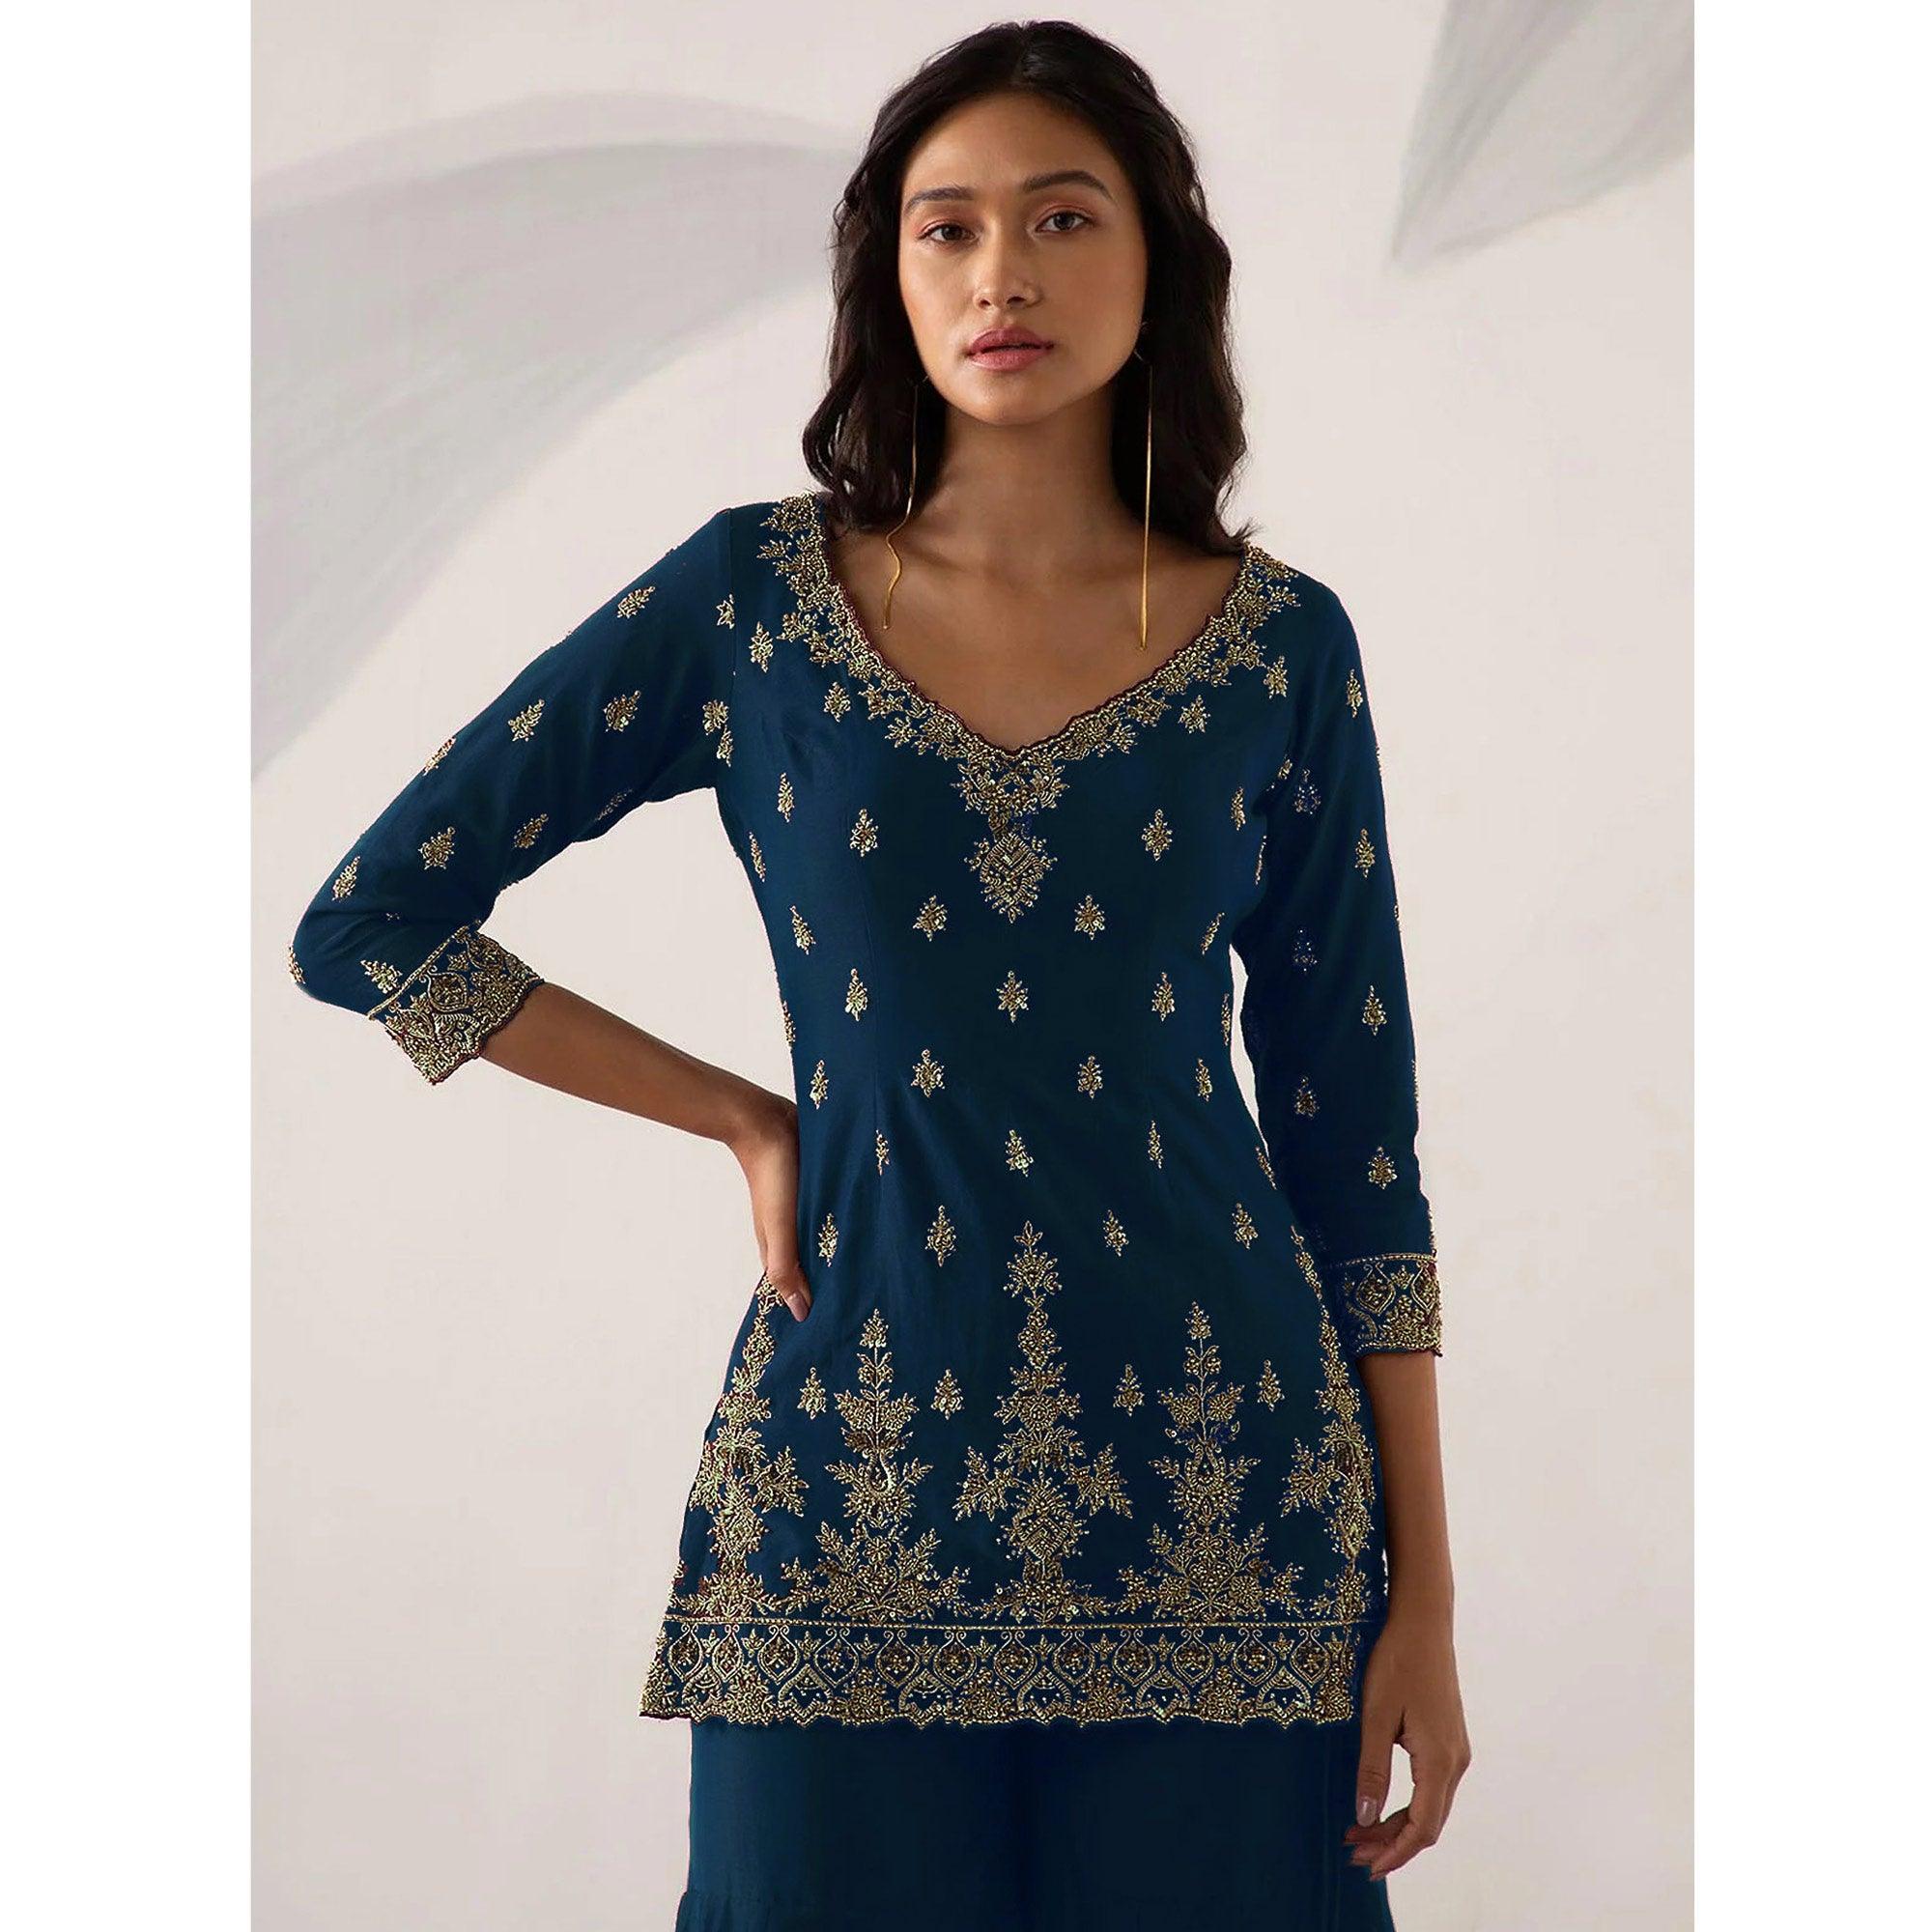 Teal Blue Embroidered Georgette Sharara Suit - Peachmode